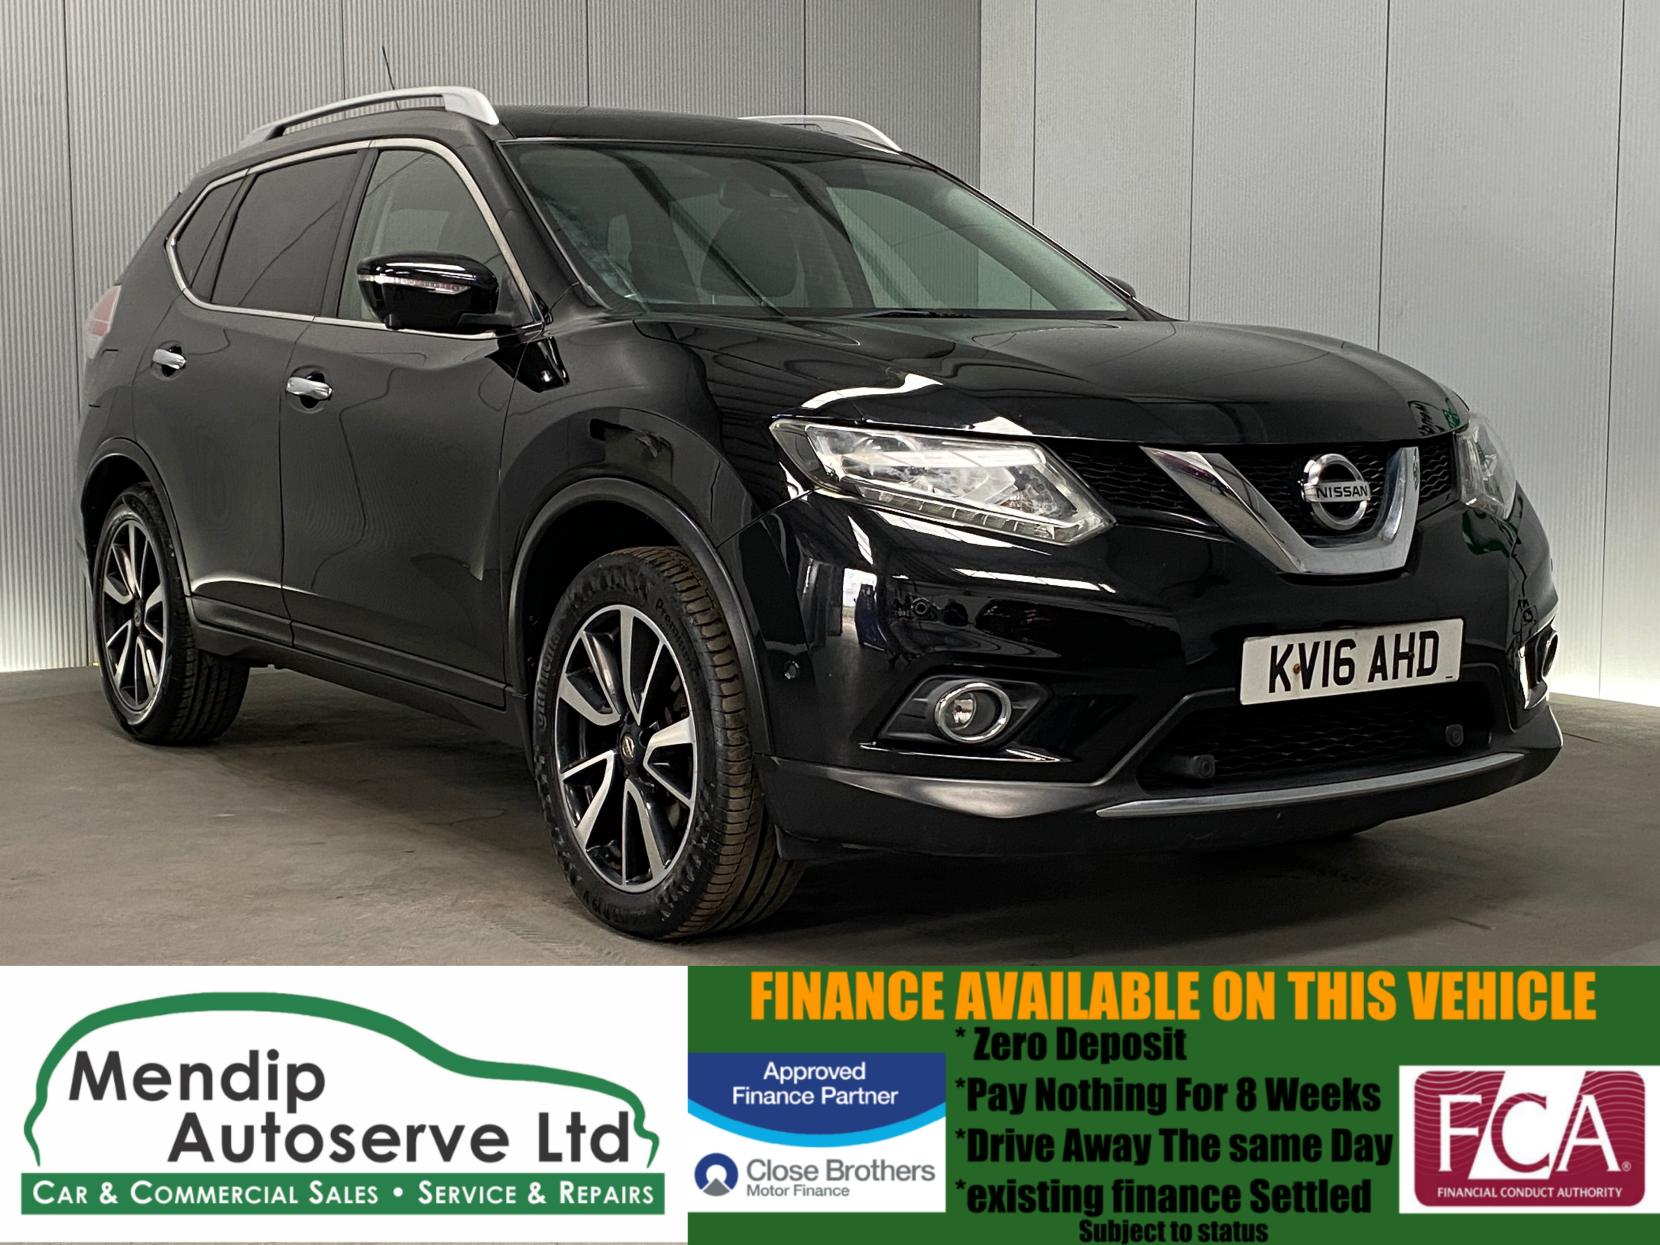 Nissan X-Trail 1.6 dCi Tekna SUV 5dr Diesel Manual 4WD Euro 6 (s/s) (130 ps)